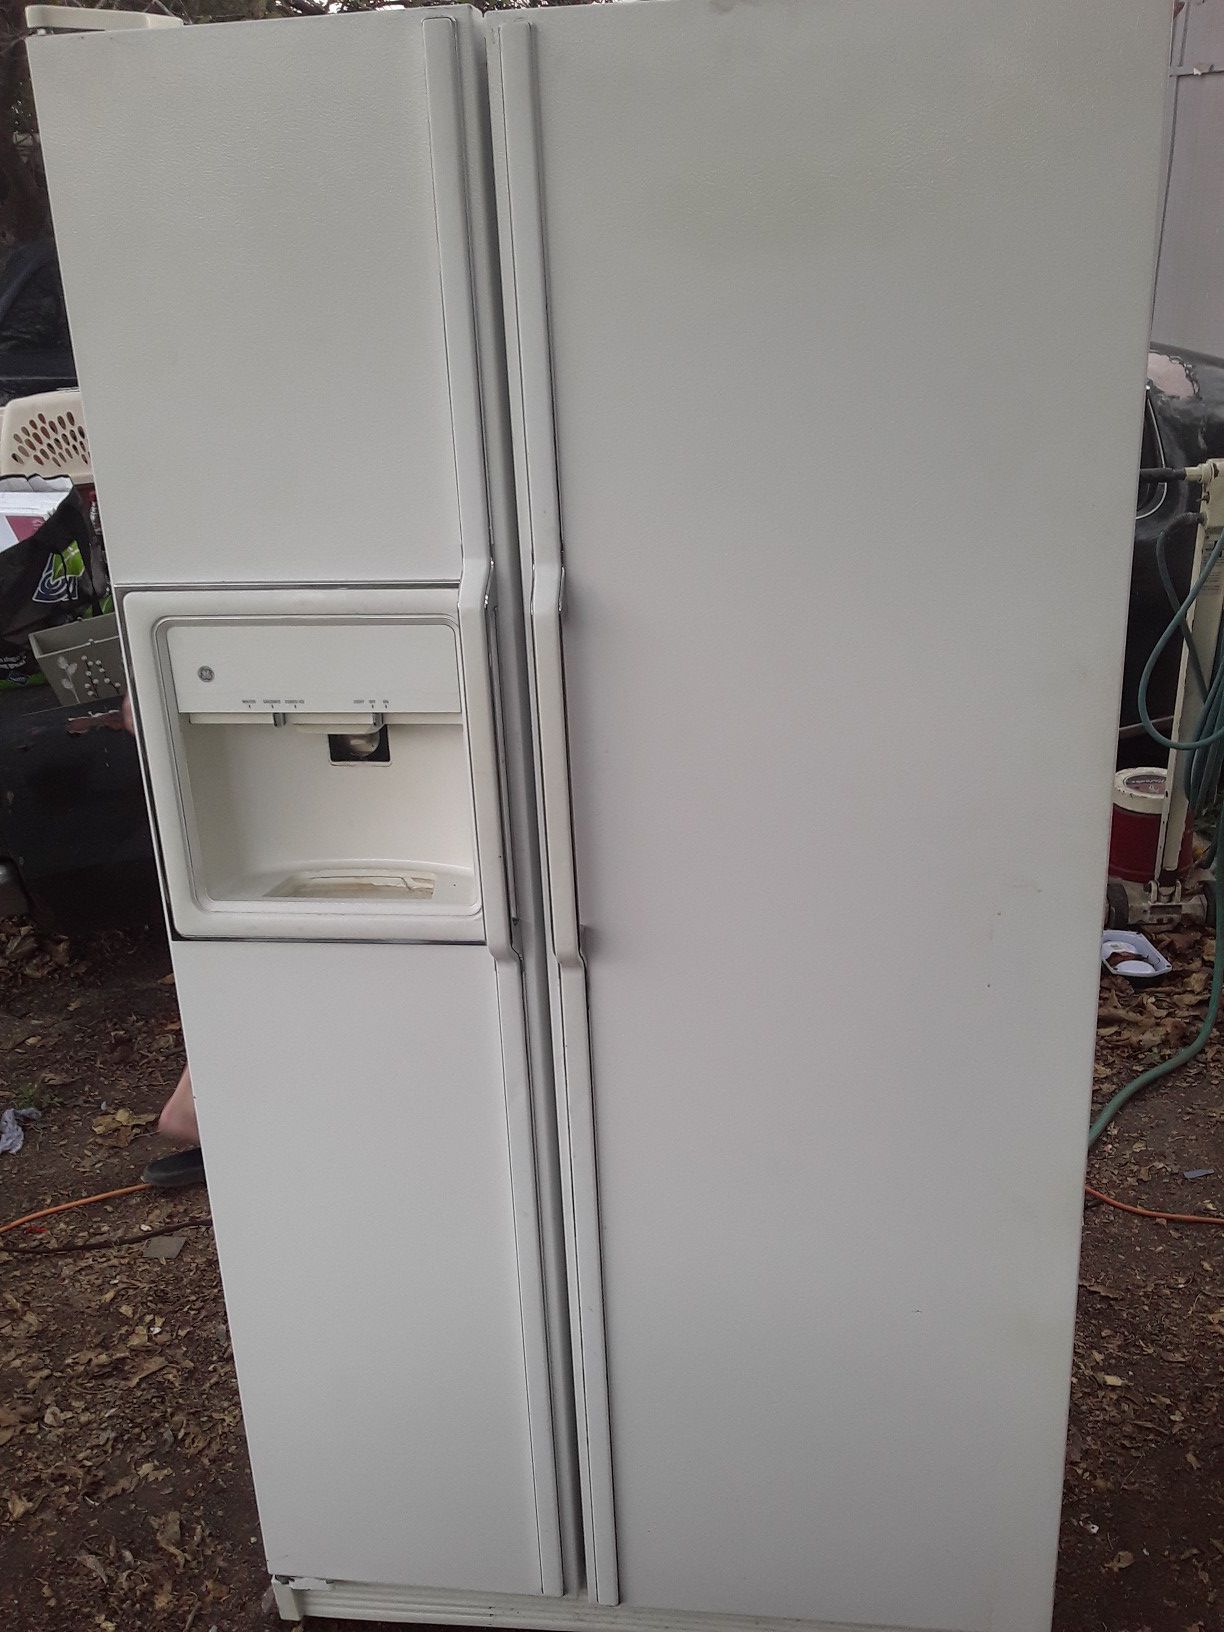 25 cubic foot GE side-by-side refrigerator